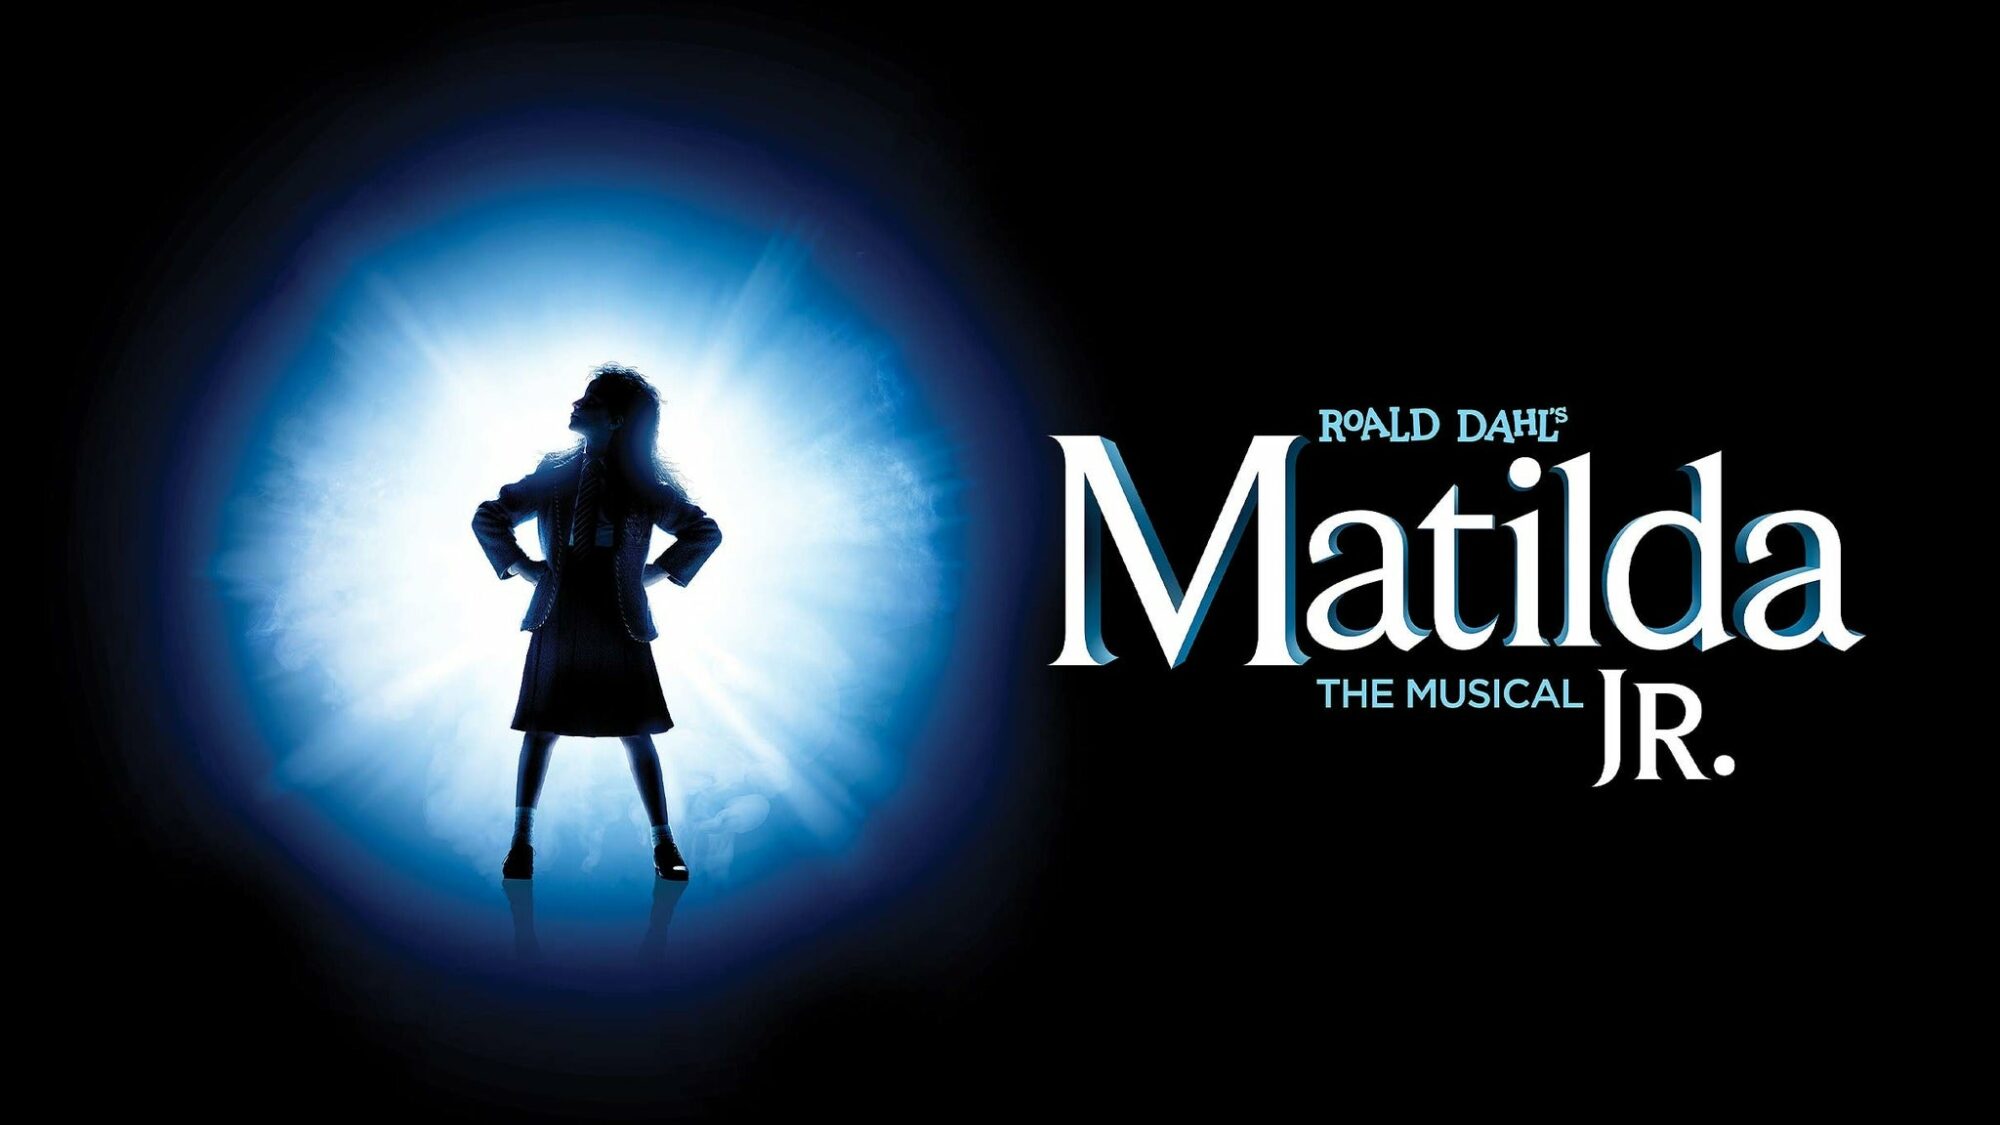 Image name Matilda Jr The Musical at Whitby Pavilion Theatre Whitby the 4 image from the post Matilda Jr: The Musical at Whitby Pavilion Theatre, Whitby in Yorkshire.com.